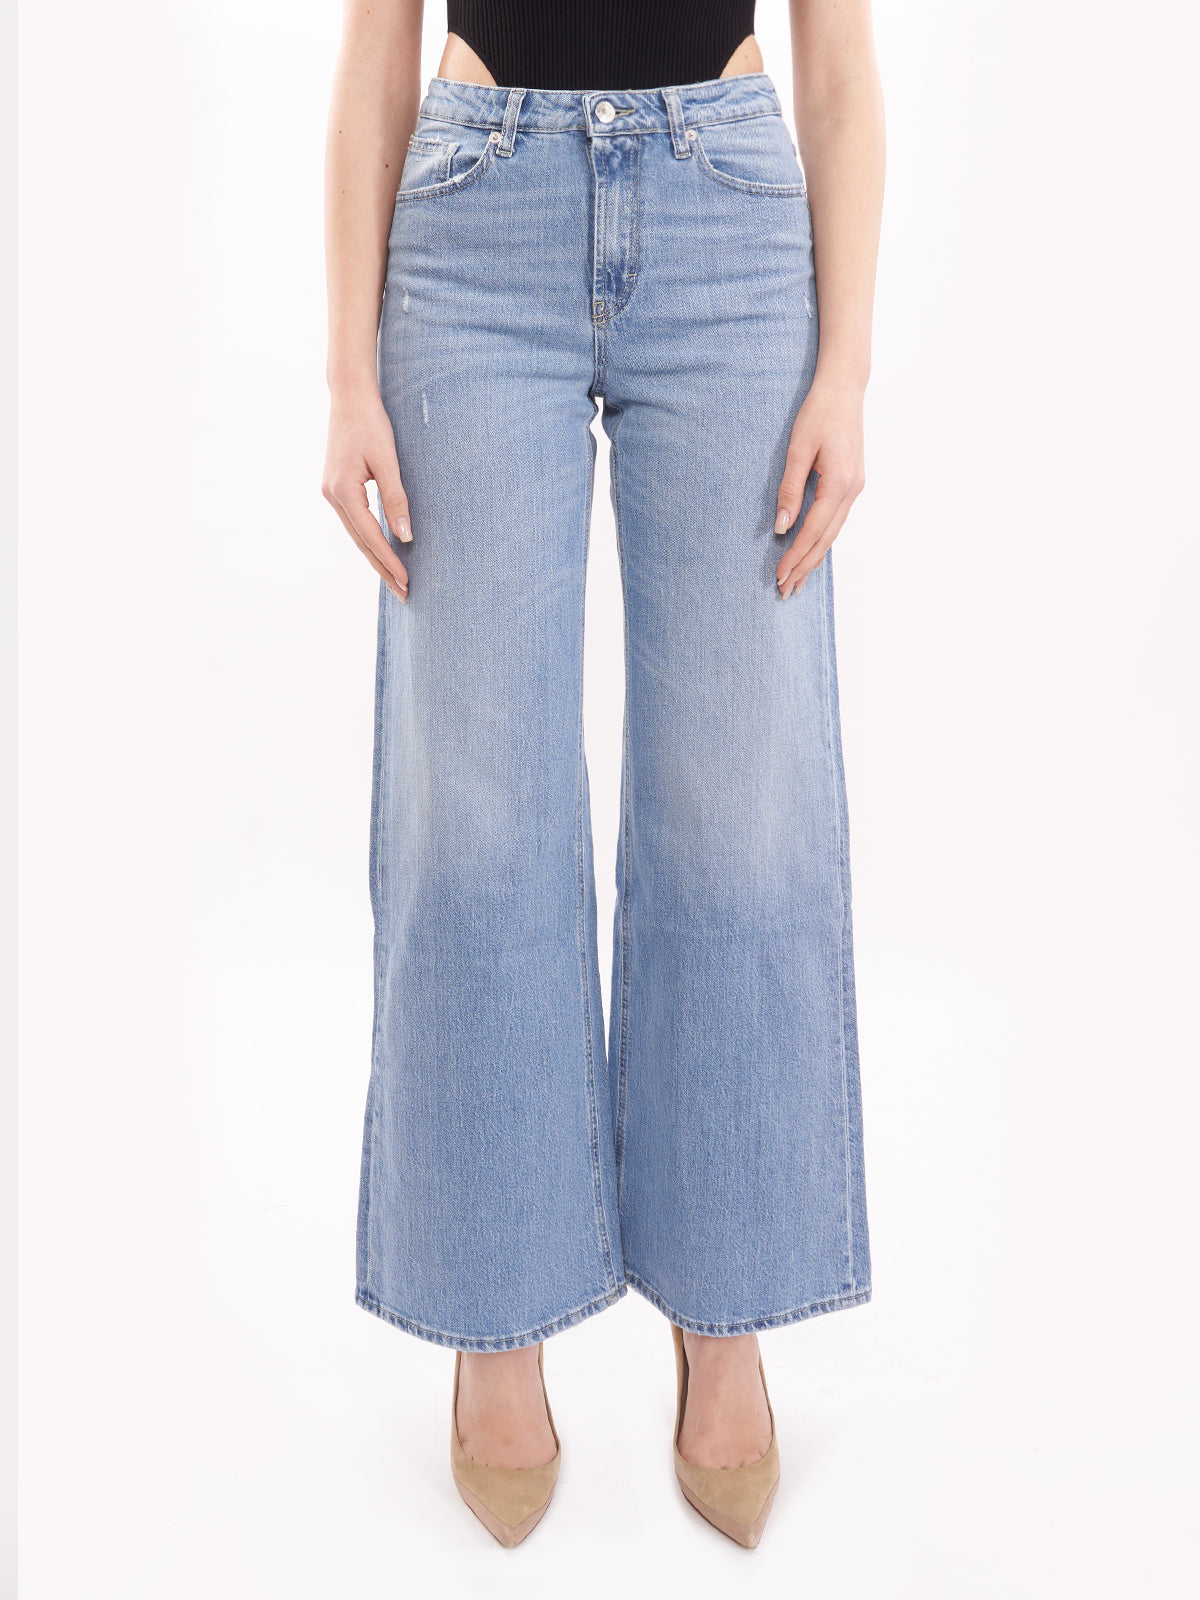 Alley palace jeans